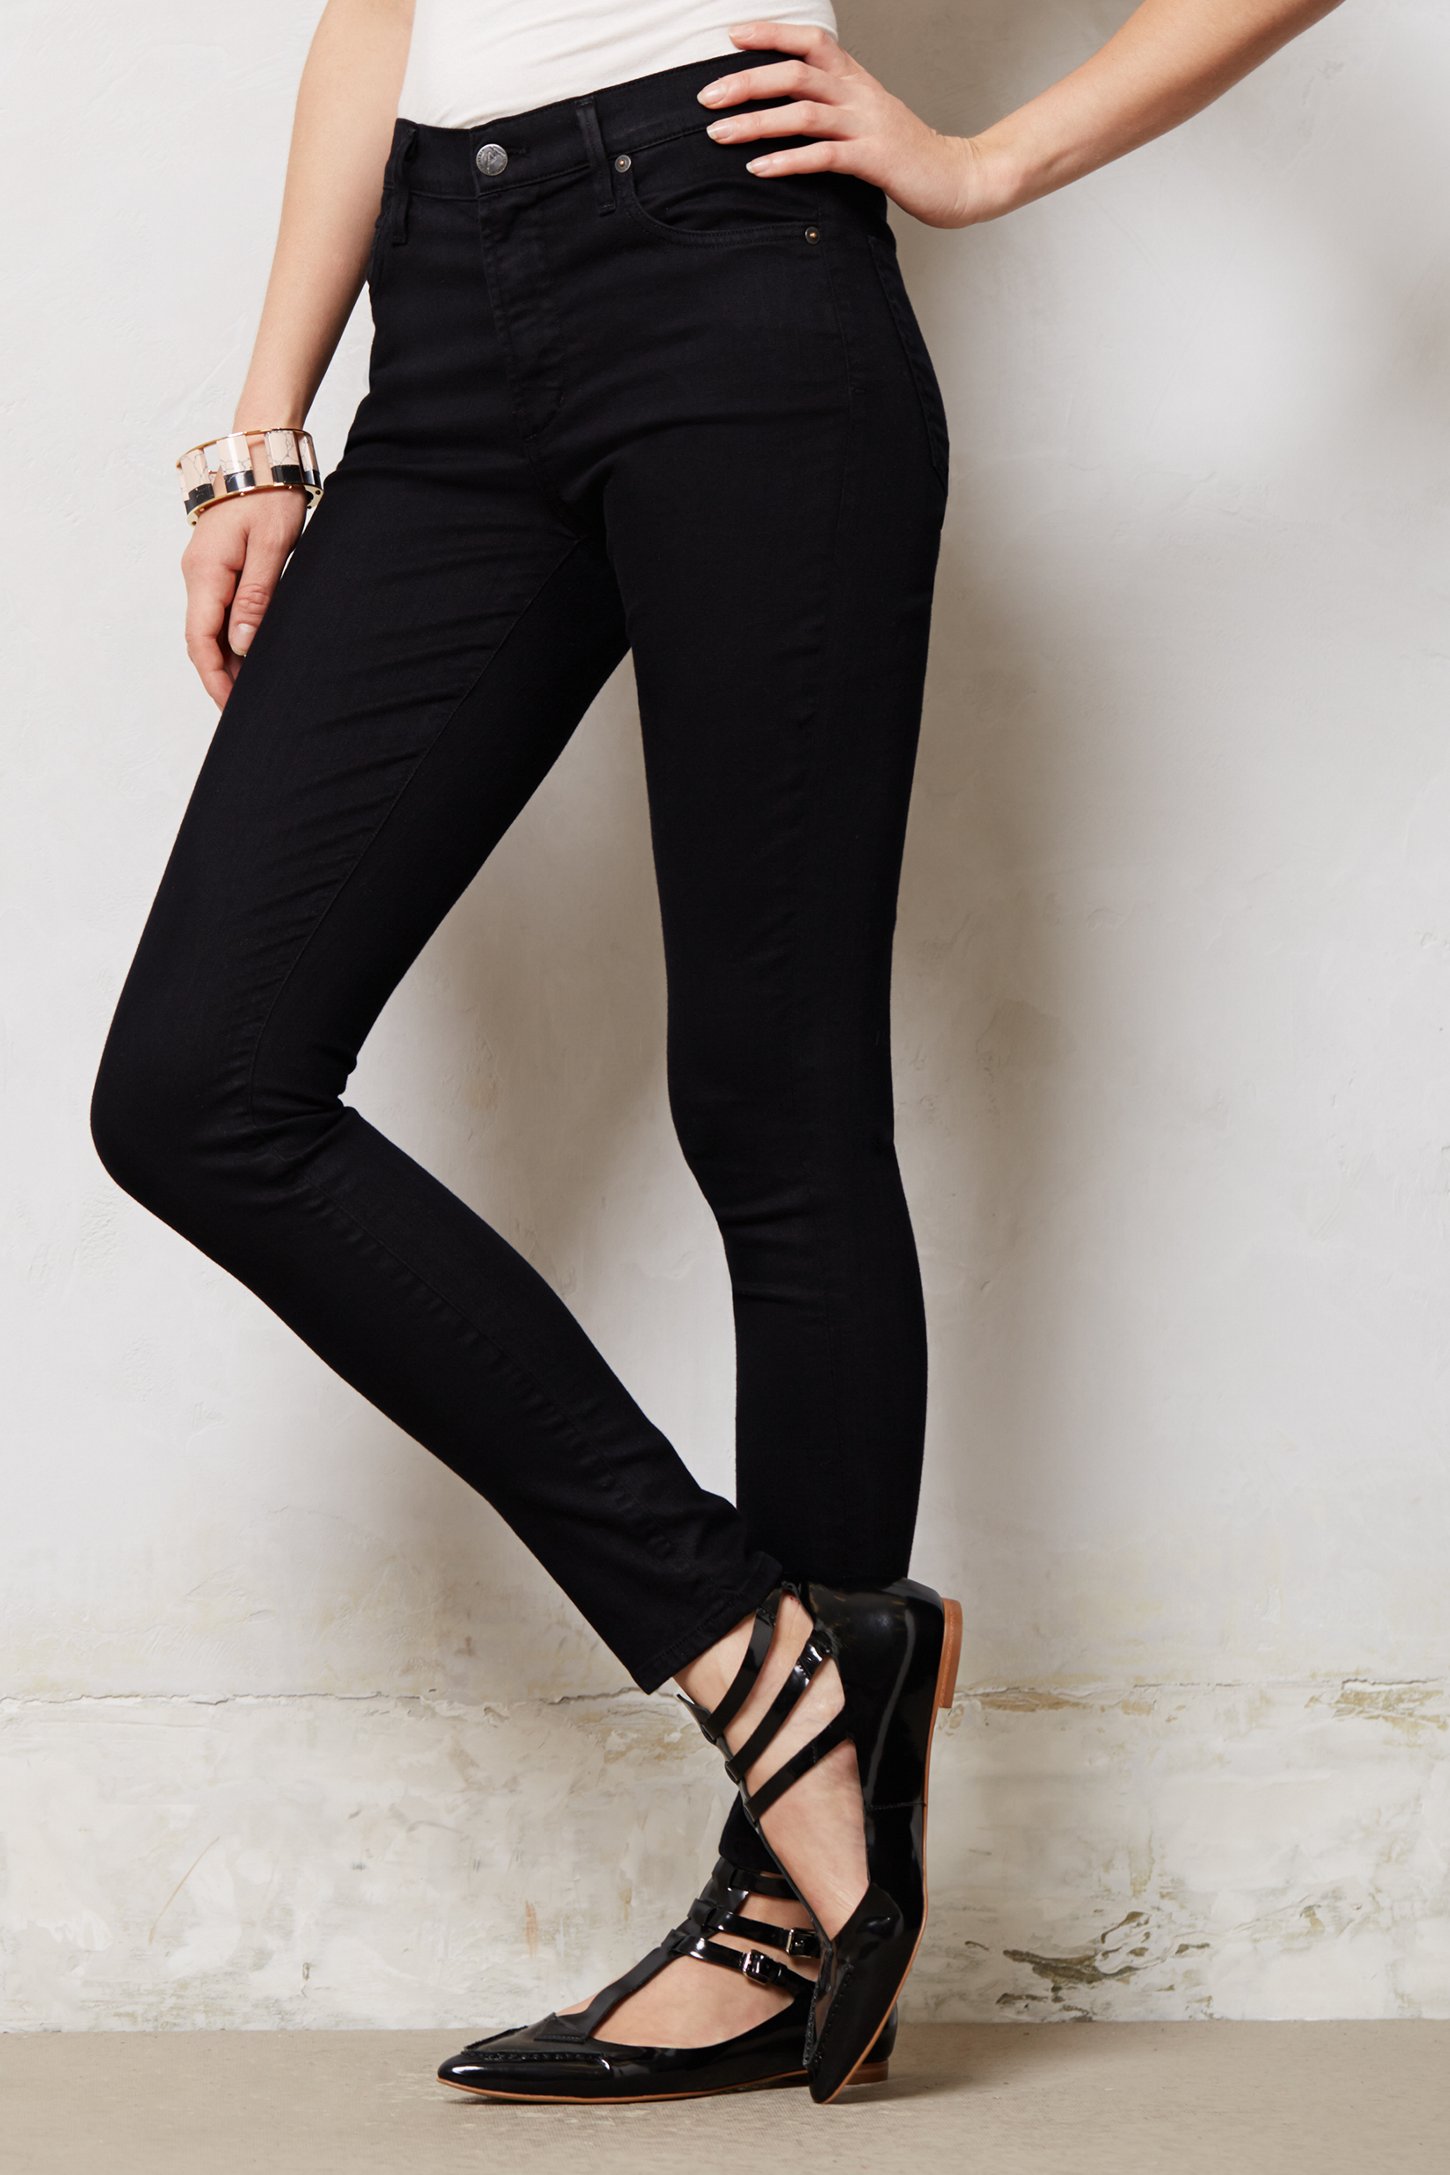 Lyst - Citizens Of Humanity Rocket High Rise Skinny Jeans in Black